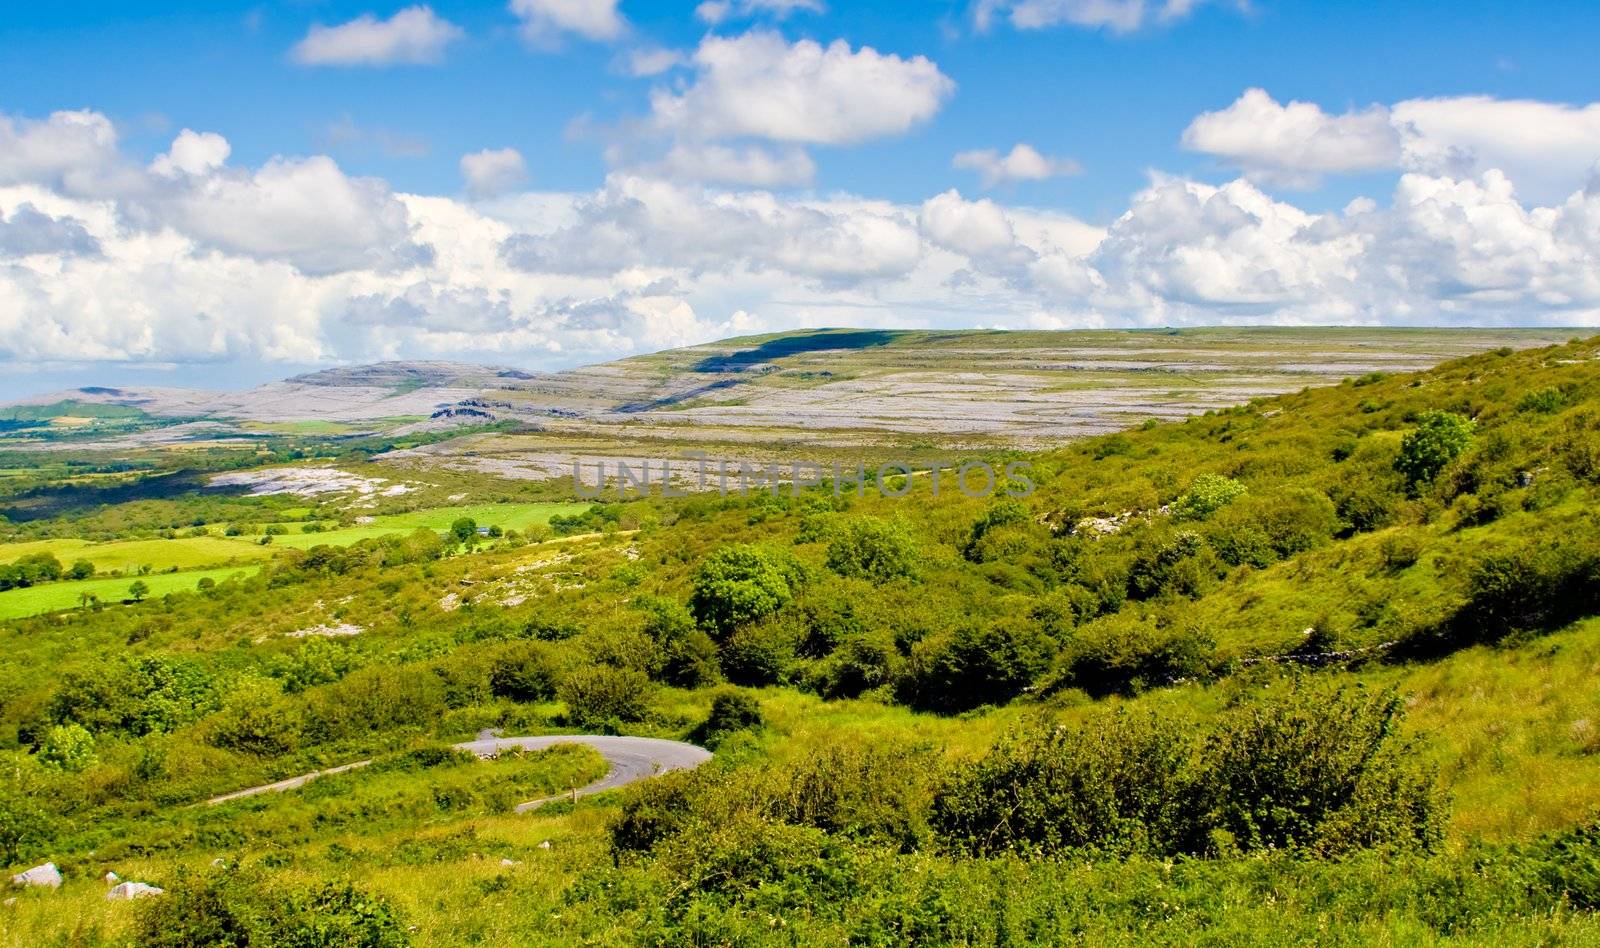 Landscape of County Clare, Ireland. Green fields, trees, and a winding road in foreground and The Burren and sky in the background. 